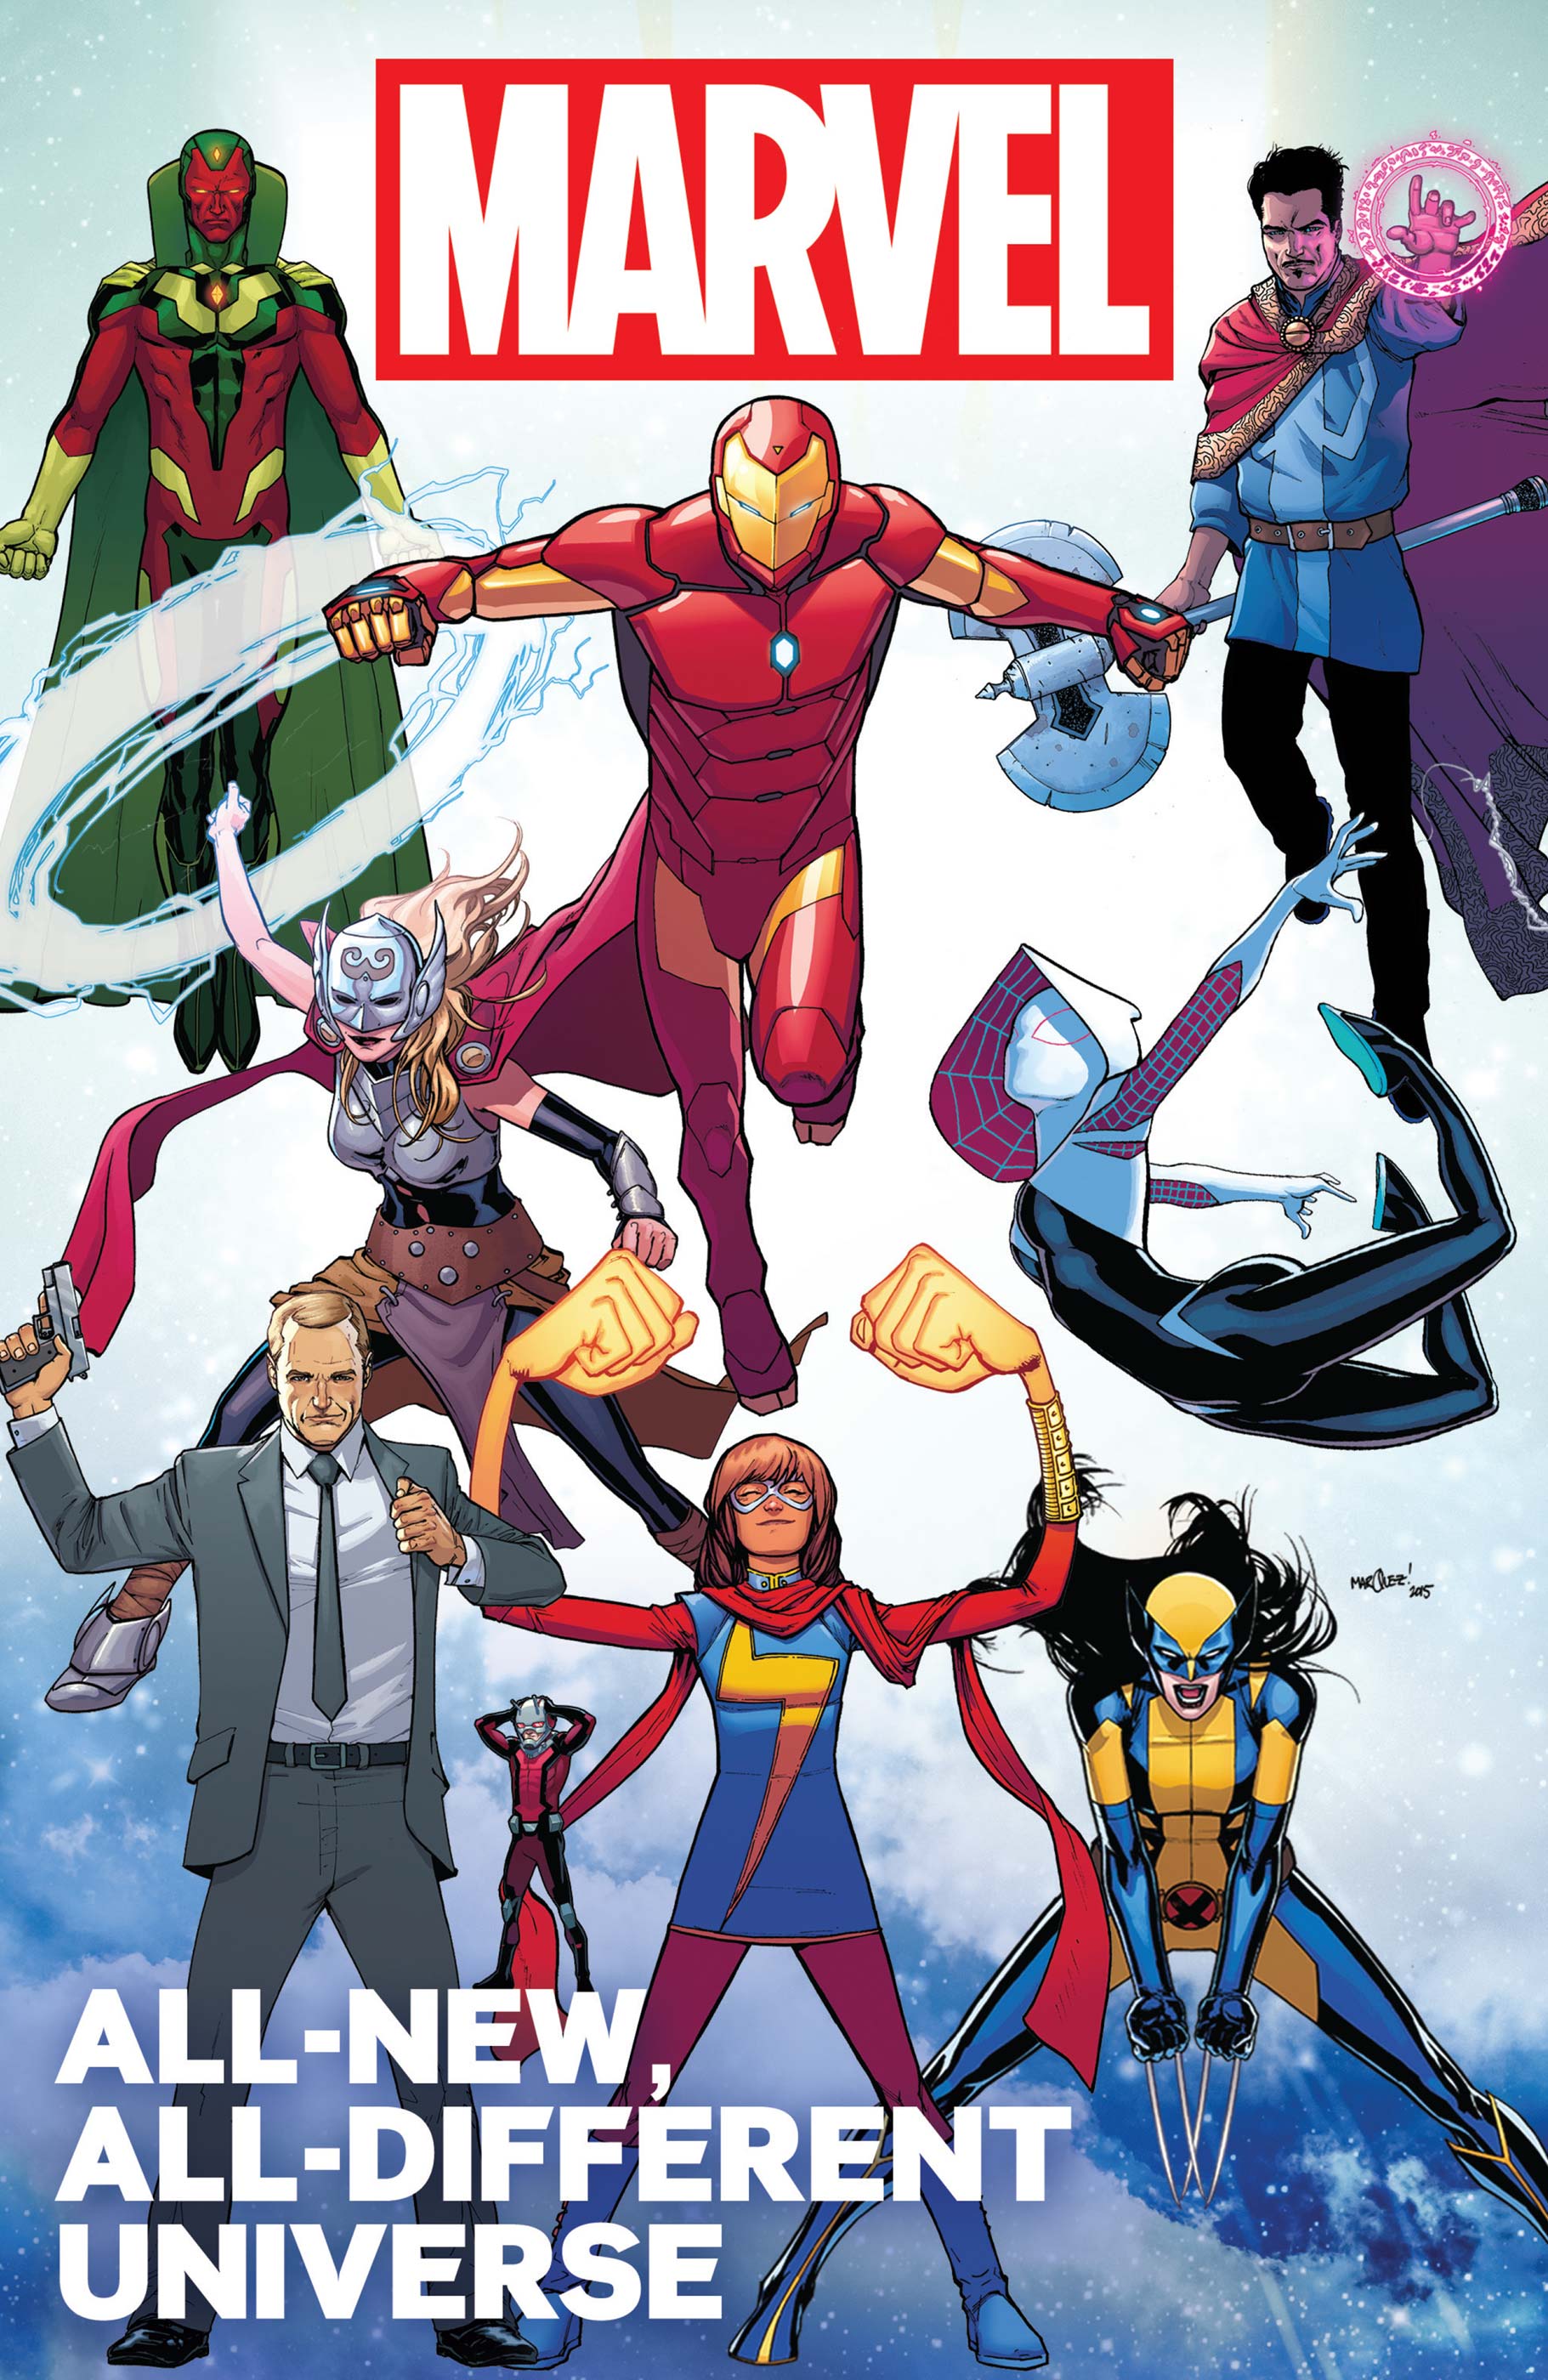 All-New, All-Different Marvel Universe (2015) #1